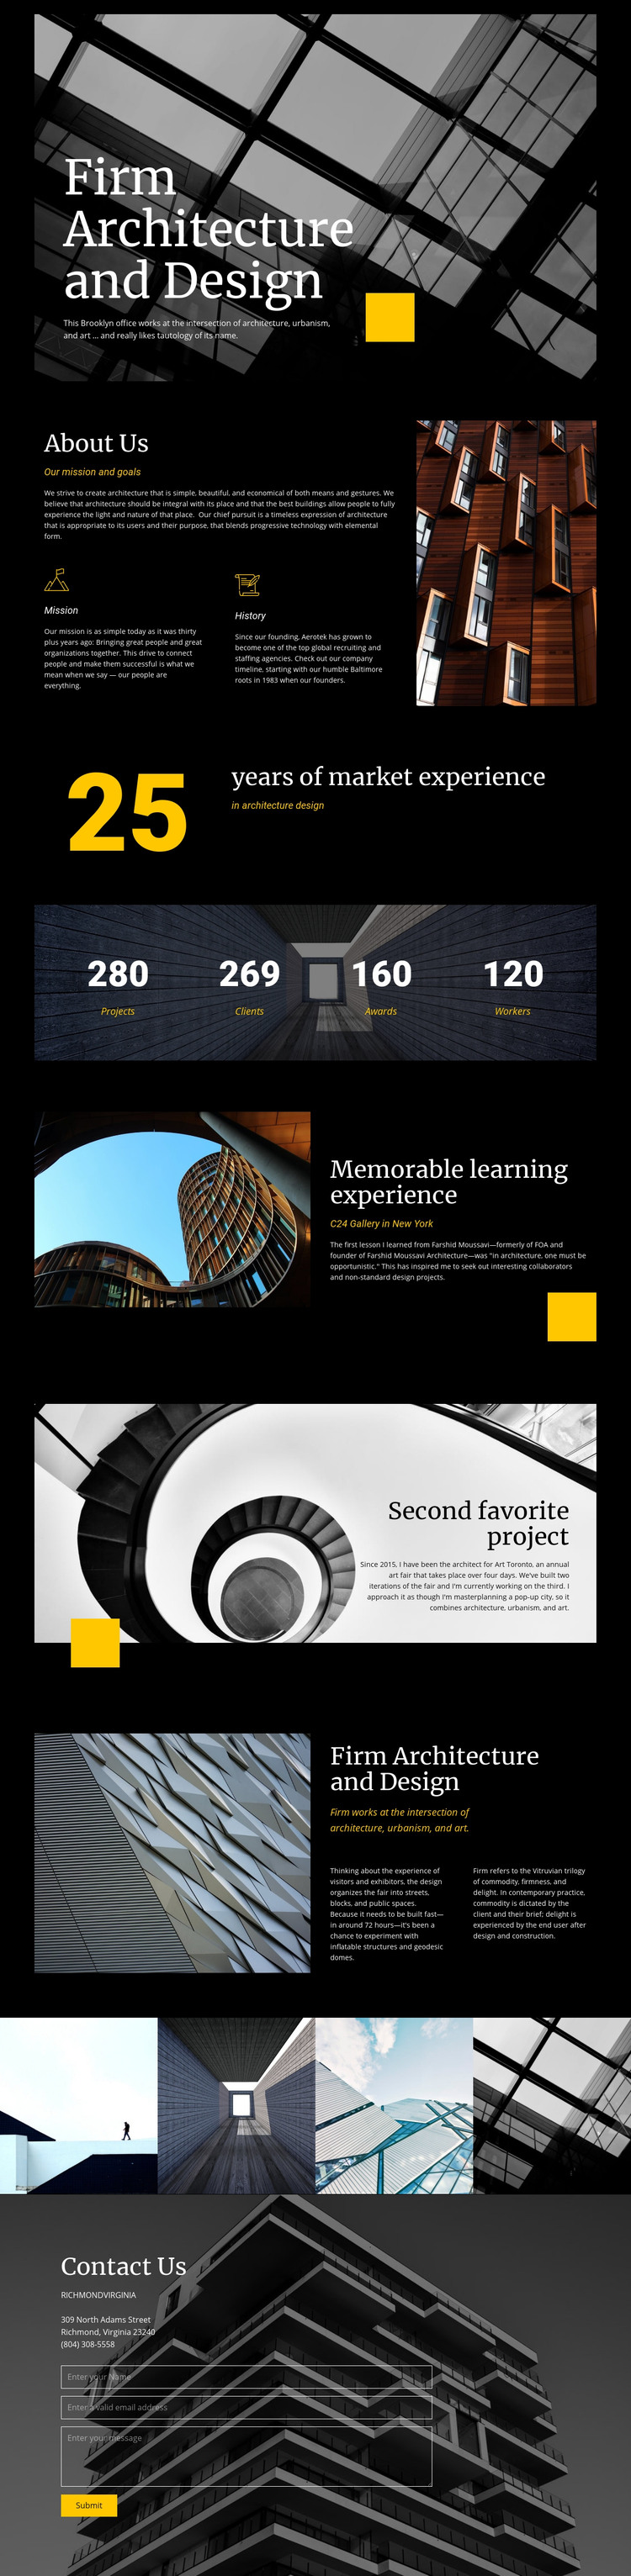 Firm architecture and Design Homepage Design